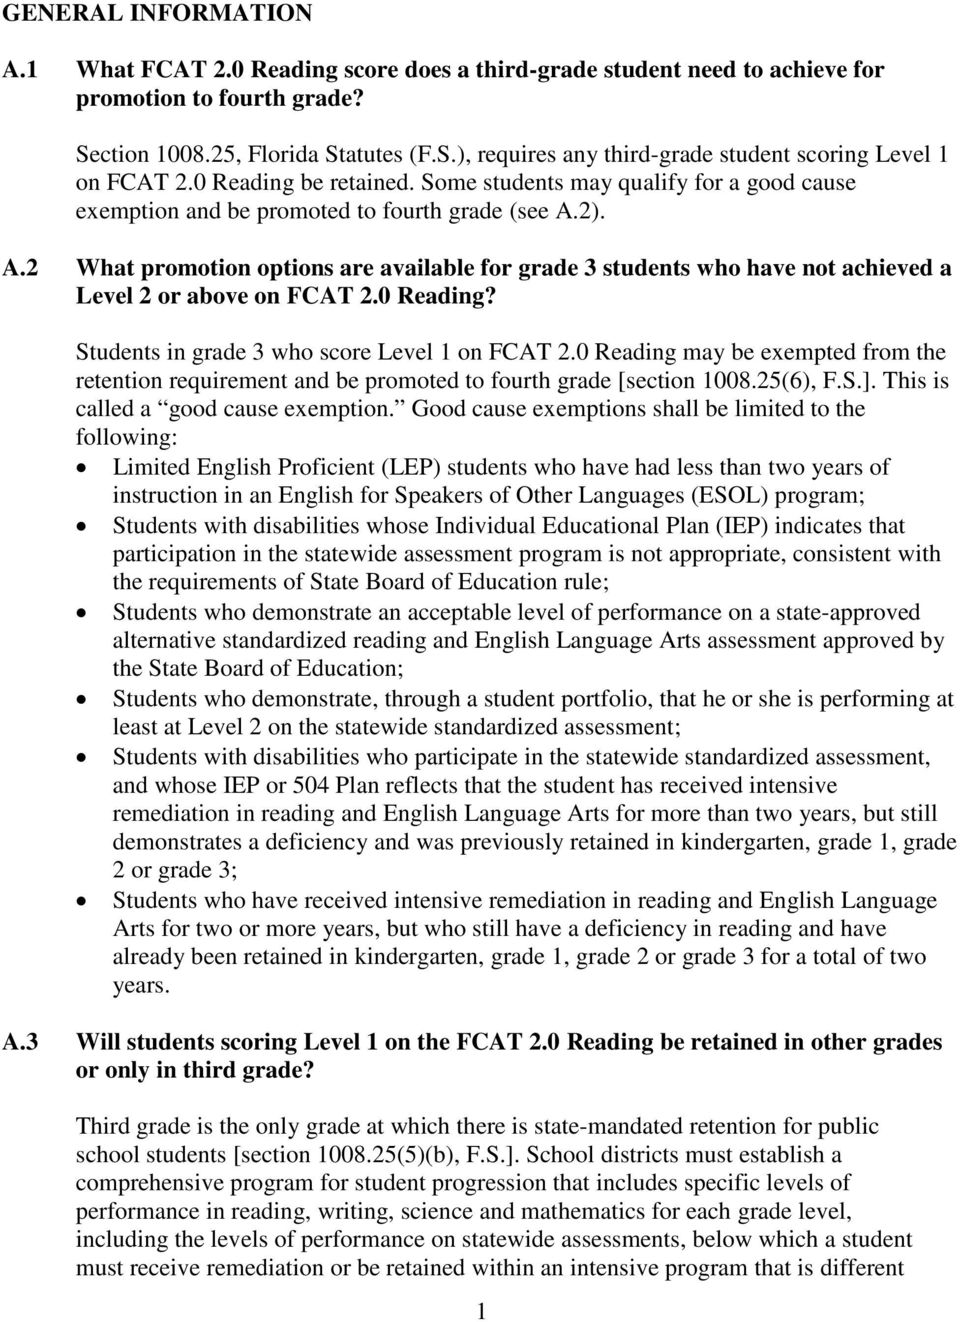 2). A.2 What promotion options are available for grade 3 students who have not achieved a Level 2 or above on FCAT 2.0 Reading? Students in grade 3 who score Level 1 on FCAT 2.